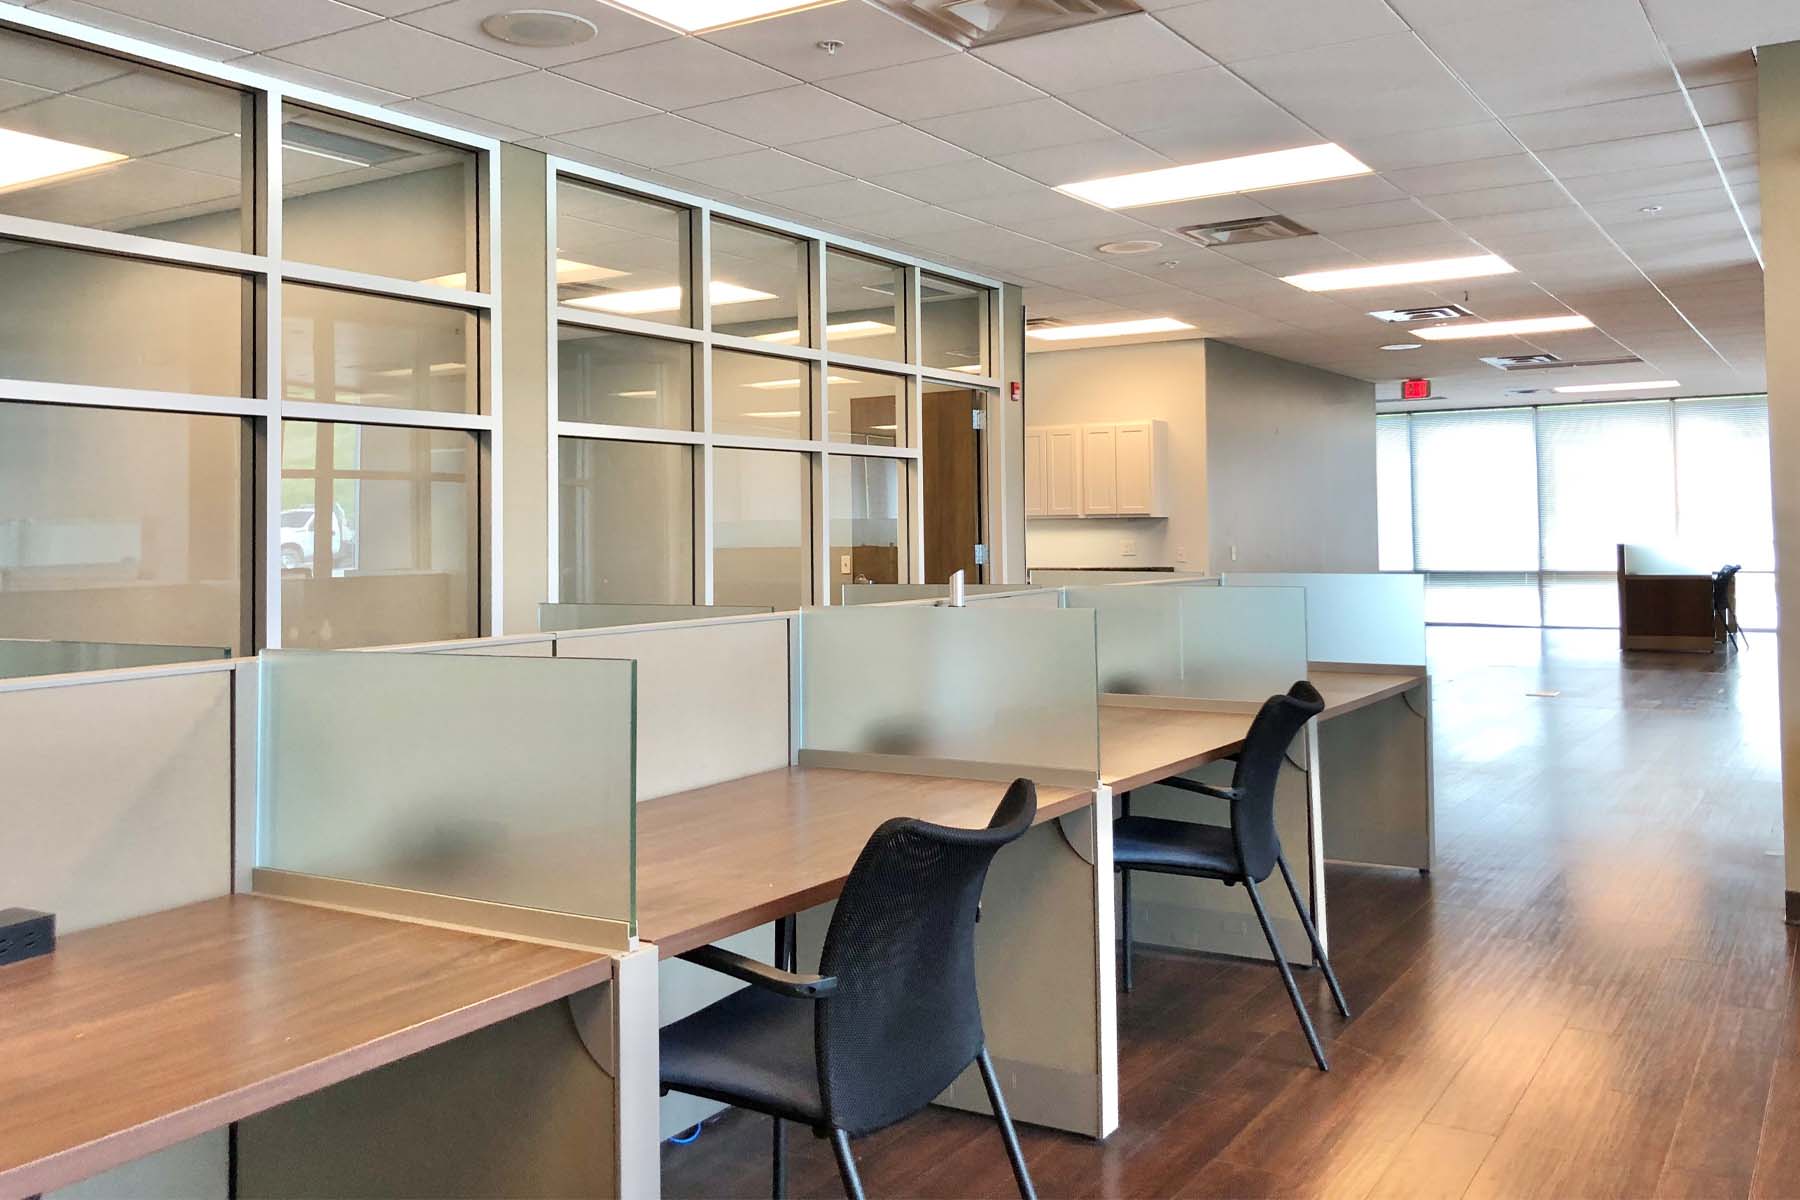 Separated office desks with chairs and open floorplan